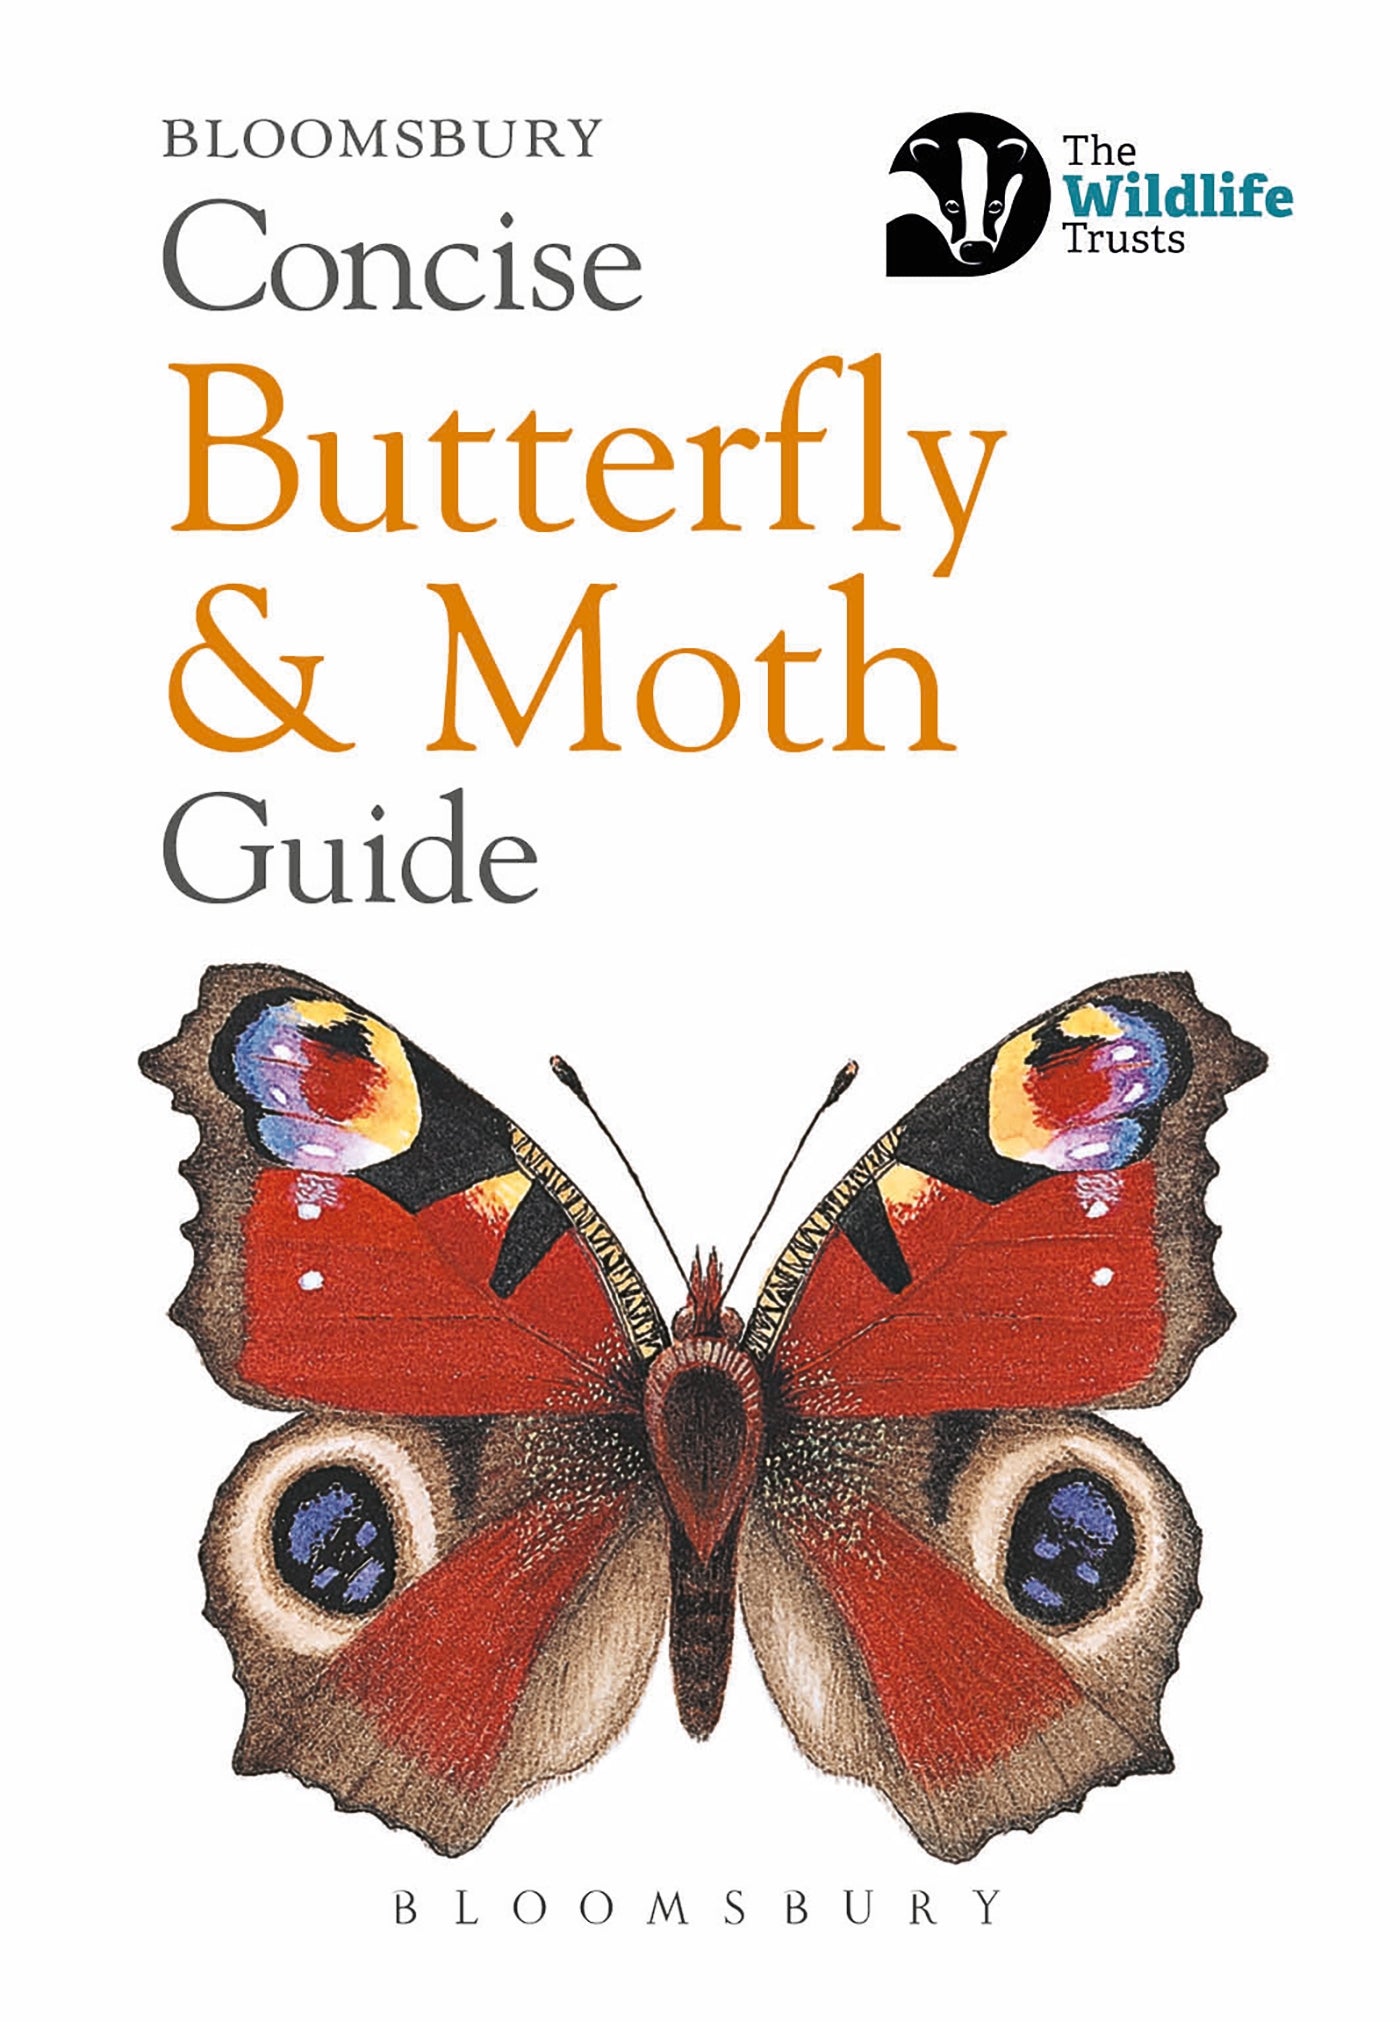 Bloomsbury concise guide - butterfly & moth